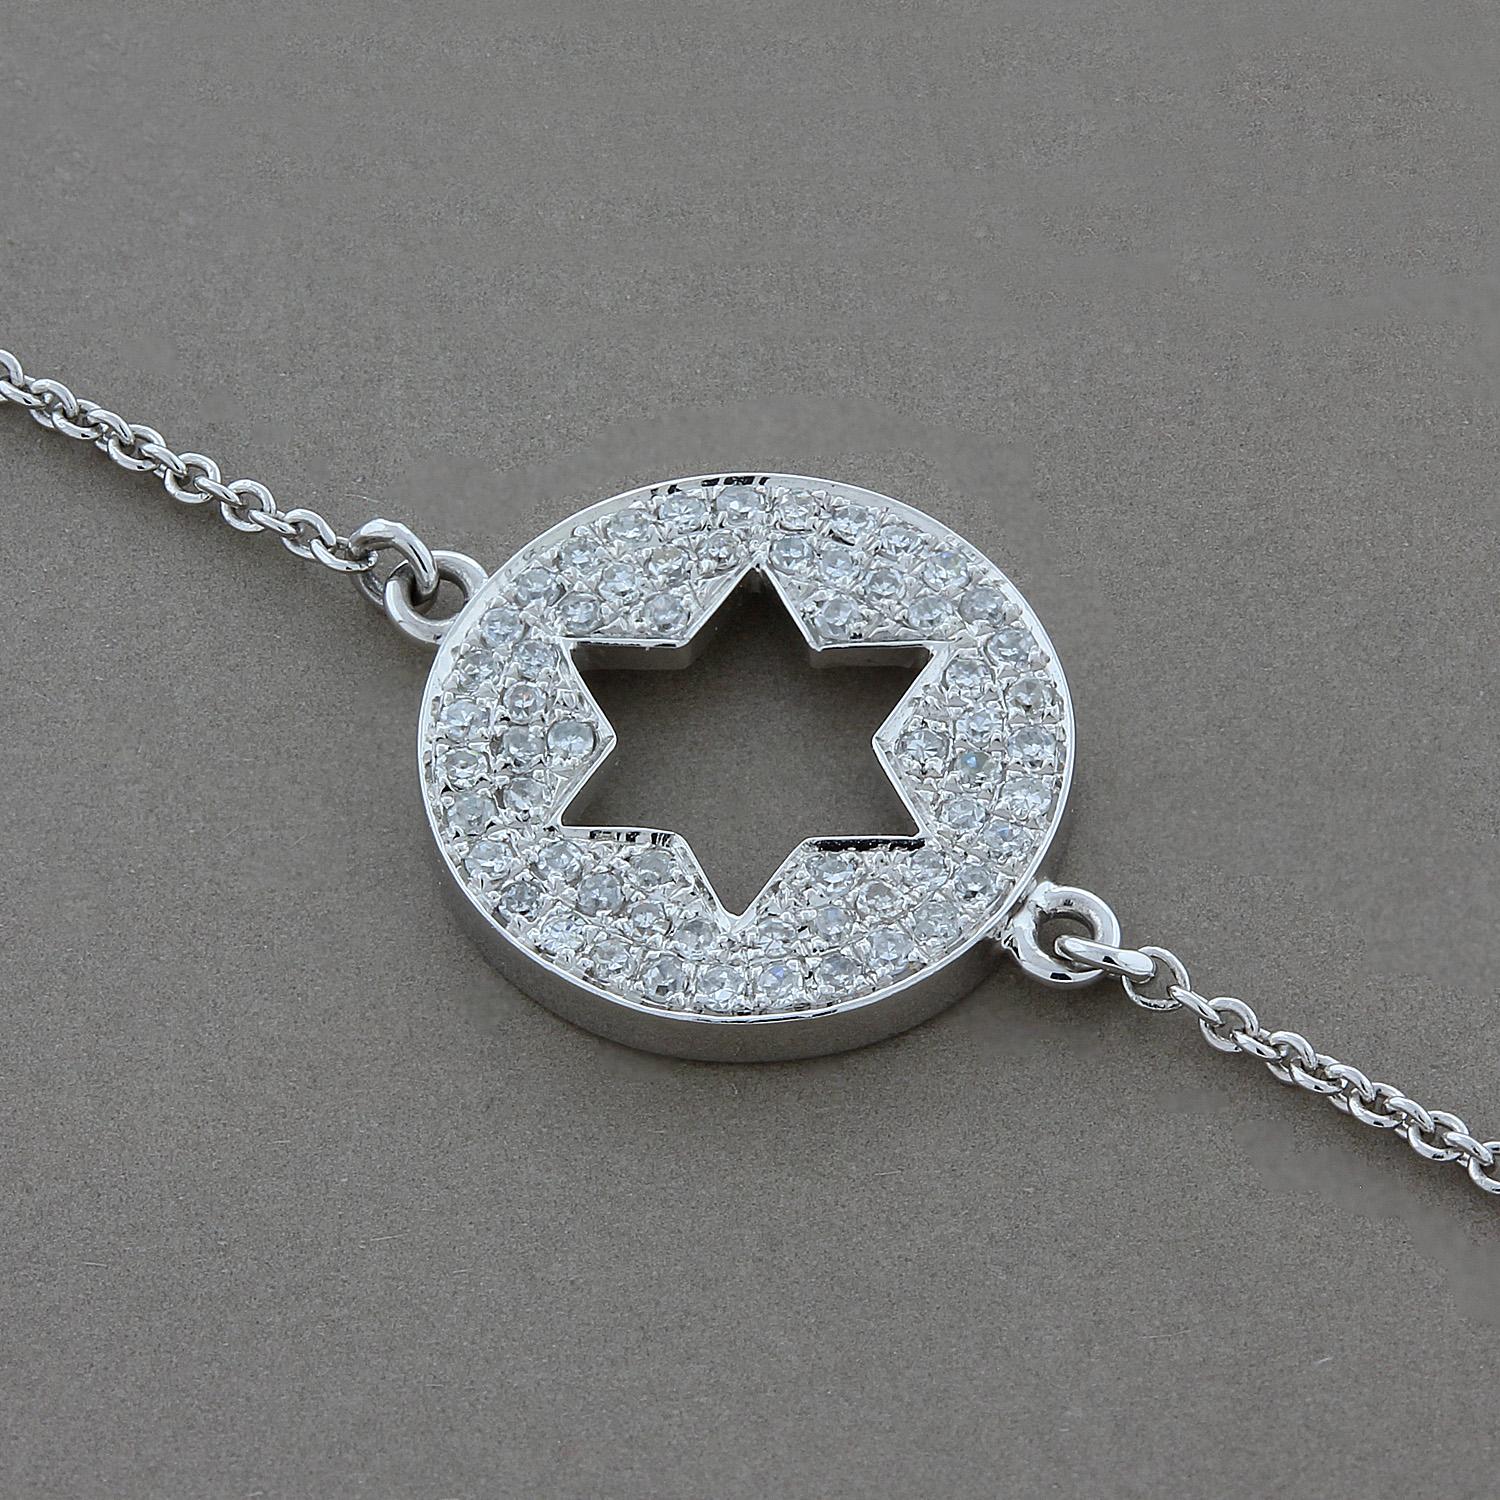 This delicate cutout of a star bracelet features 0.15 carats of pave set diamonds on a 14K white gold chain. A comfortable everyday piece to stack or wear alone.

Adjustable chain with sizing loops to fits wrists up to 6 ½ inches and 7 ½ inches.
